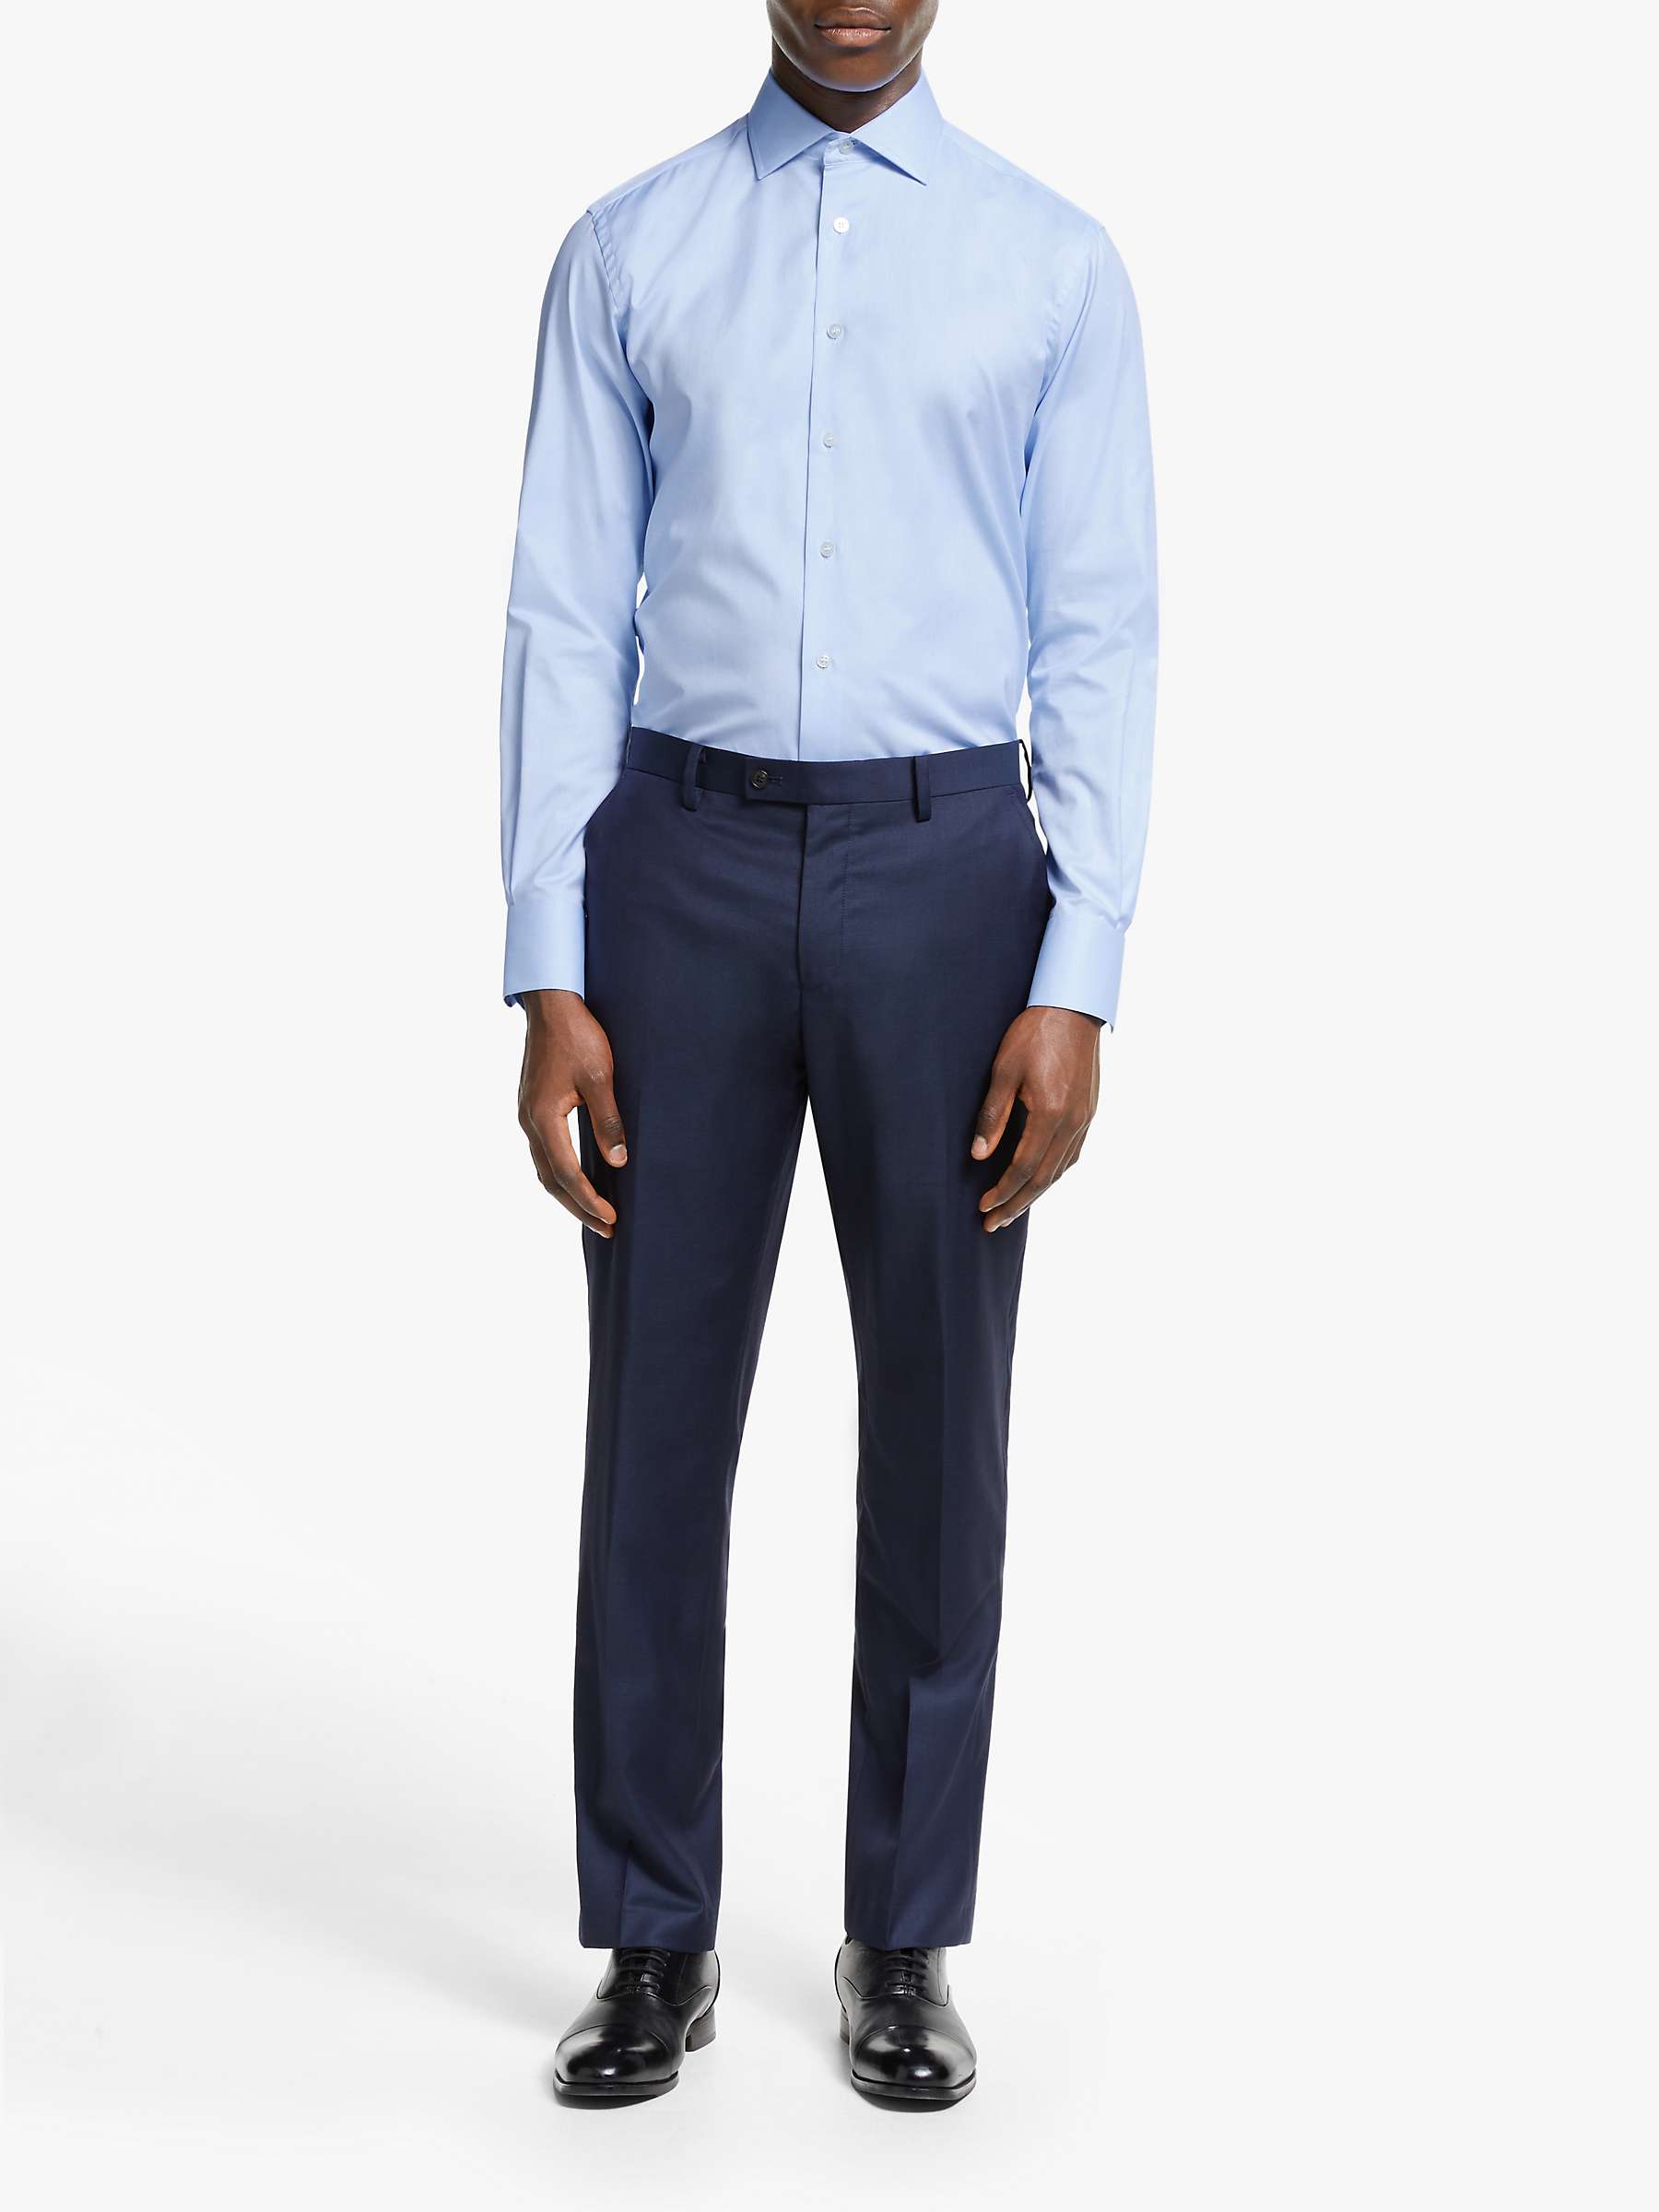 Buy Smyth & Gibson Oxford Pin Dot Contemporary Fit Shirt Online at johnlewis.com